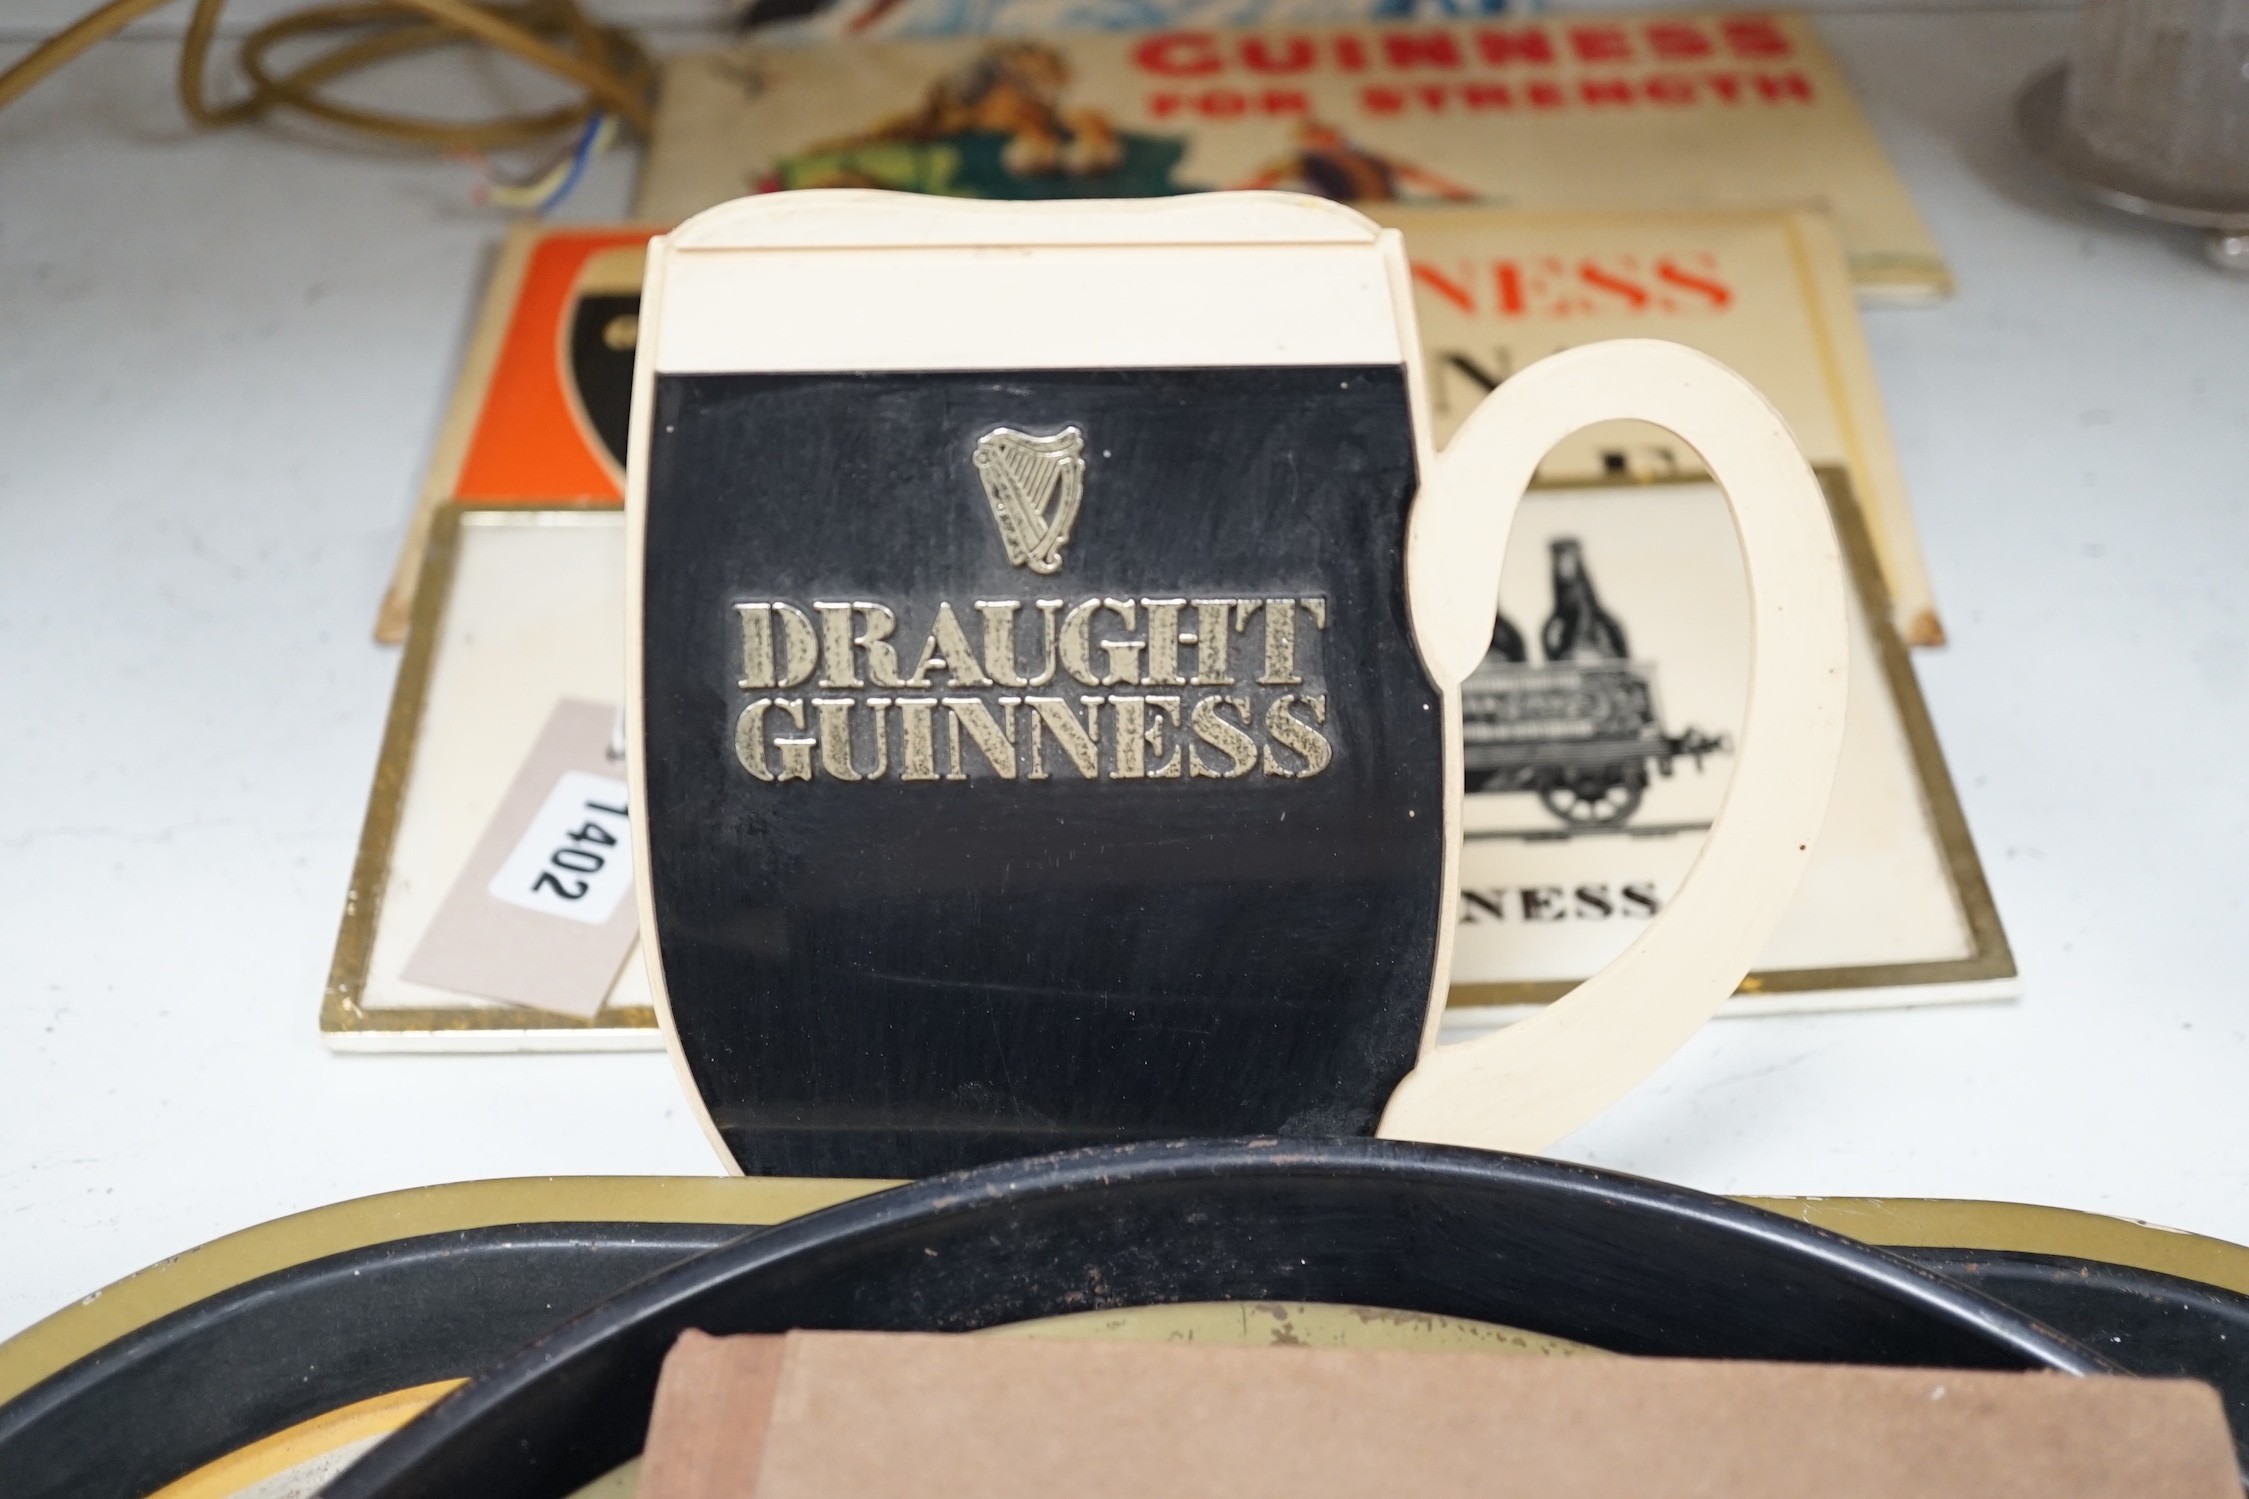 Five Guinness advertising signs, mirror, trays and a book - St. James’s Gate Brewery History and - Image 2 of 5